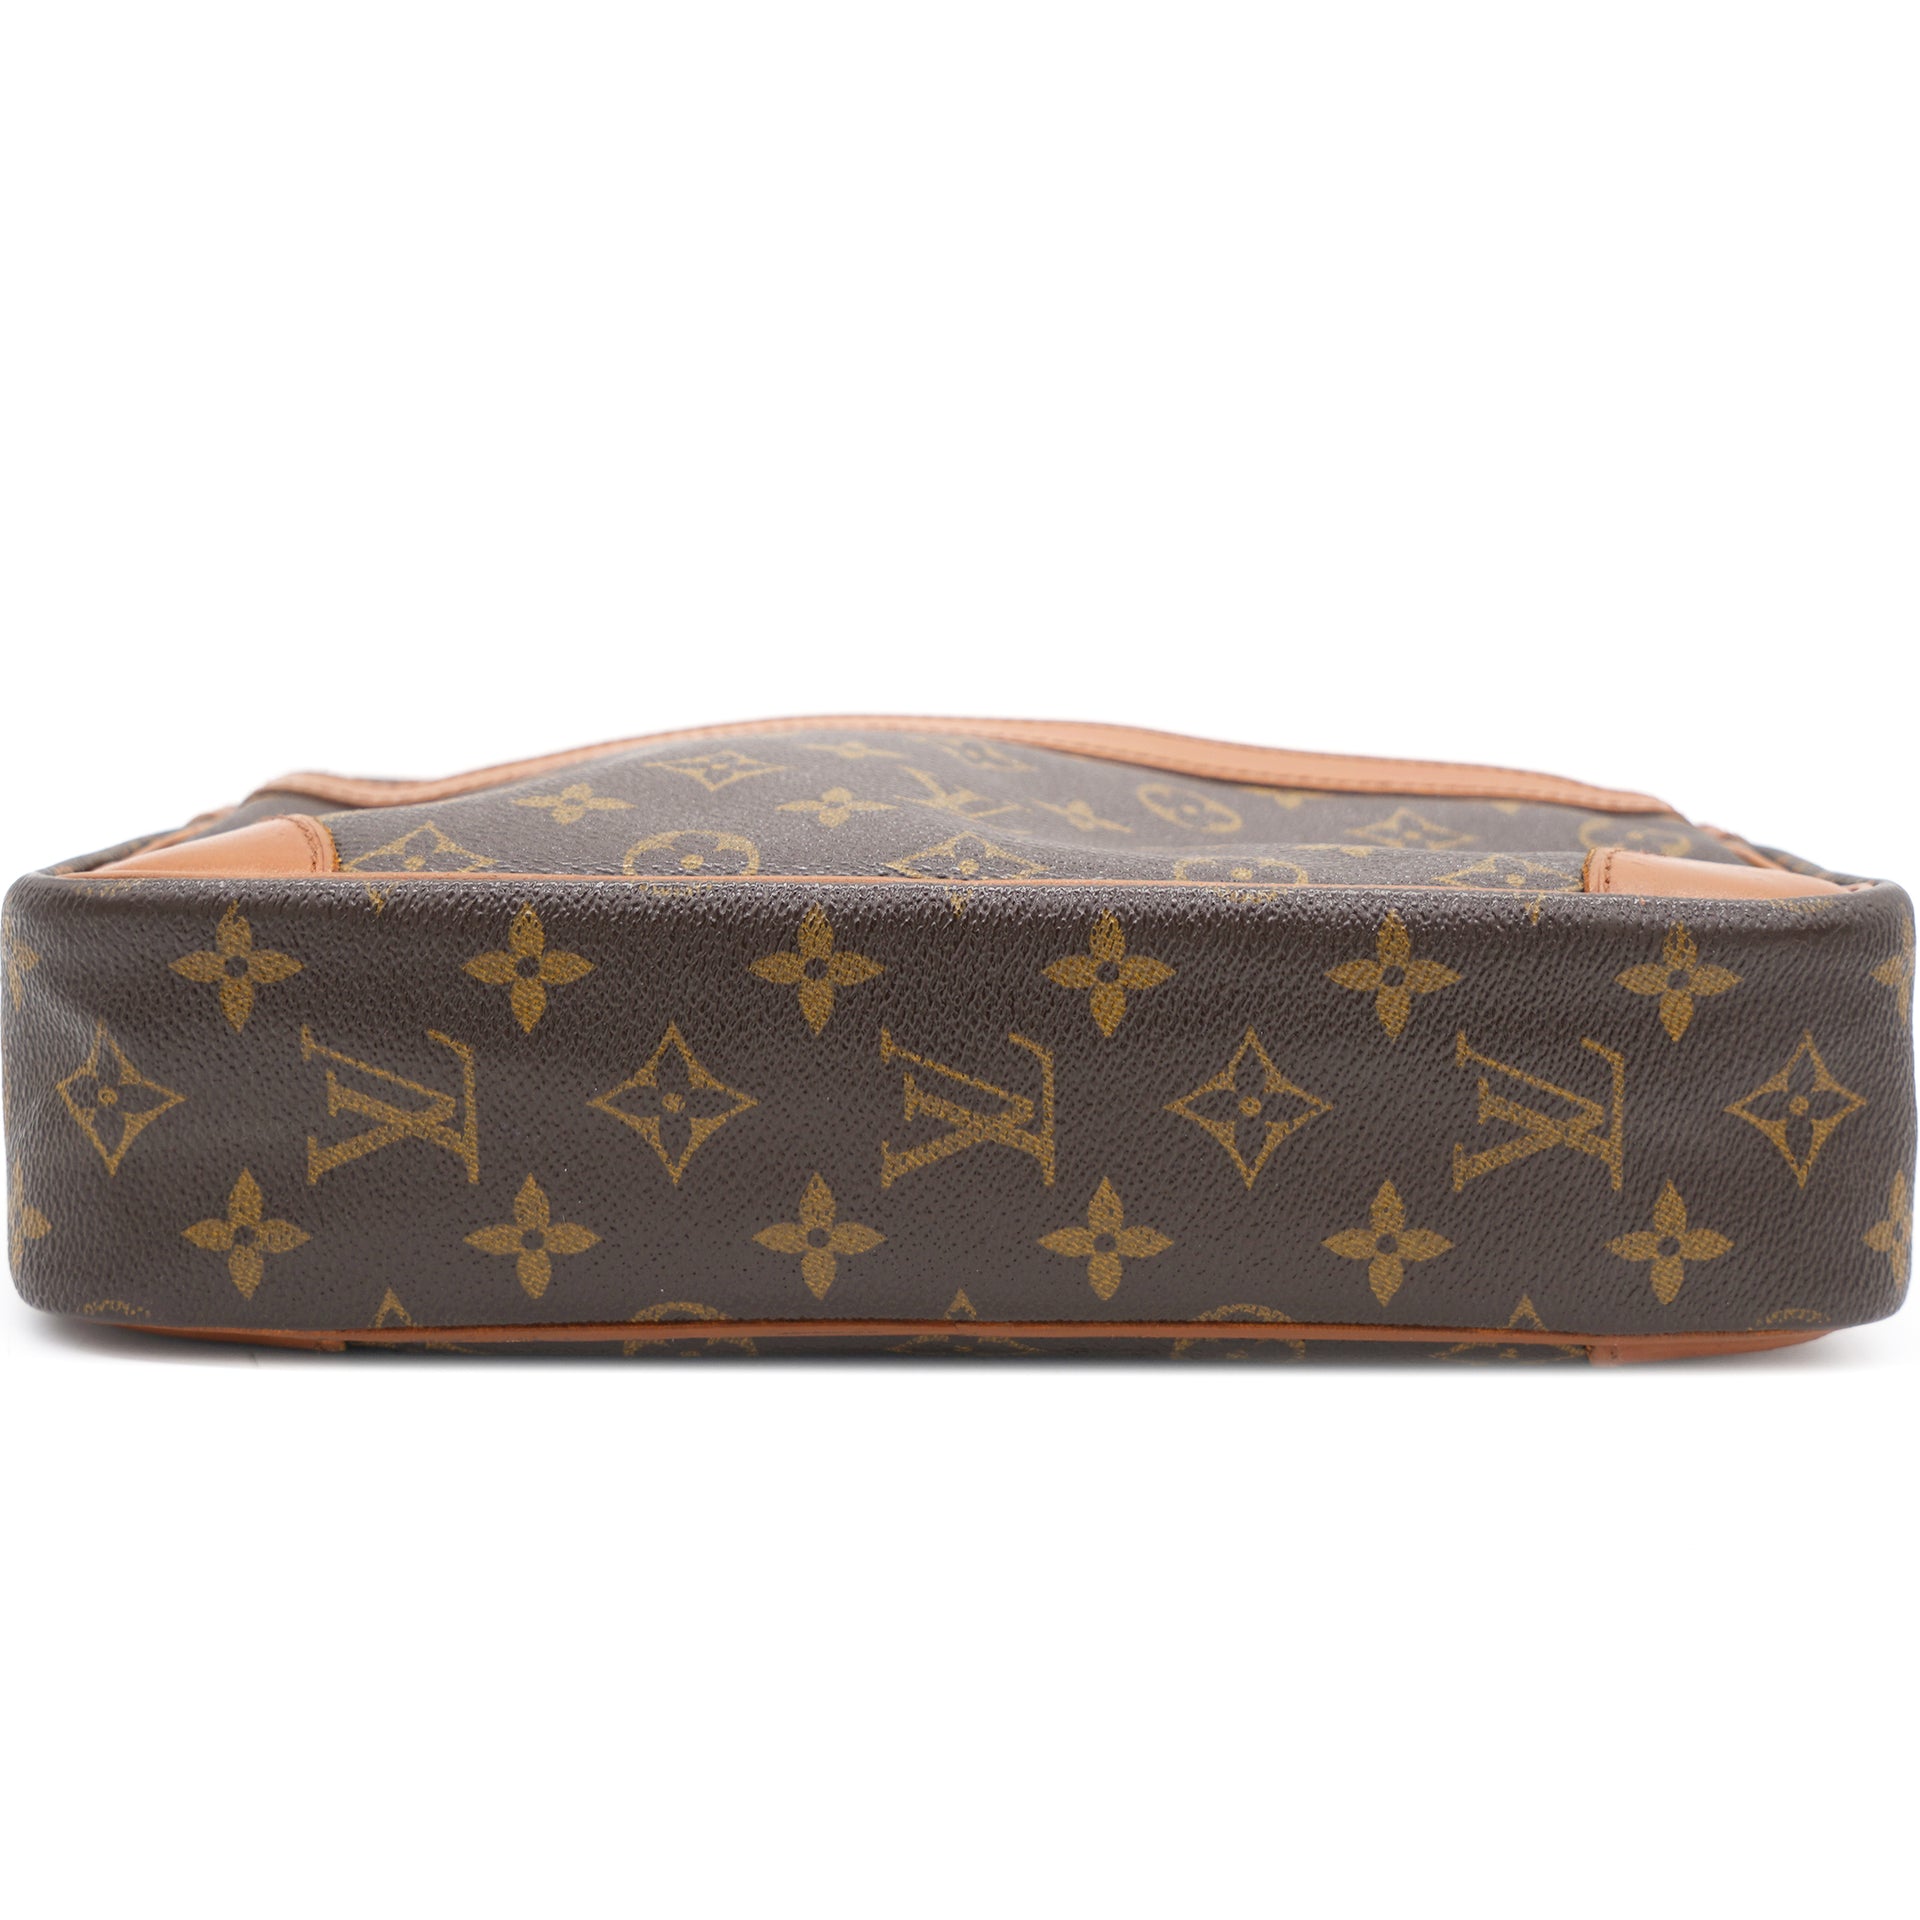 LOUIS VUITTON Compiegne 28 clutch second bag M51845｜Product  Code：2107400159838｜BRAND OFF Online Store